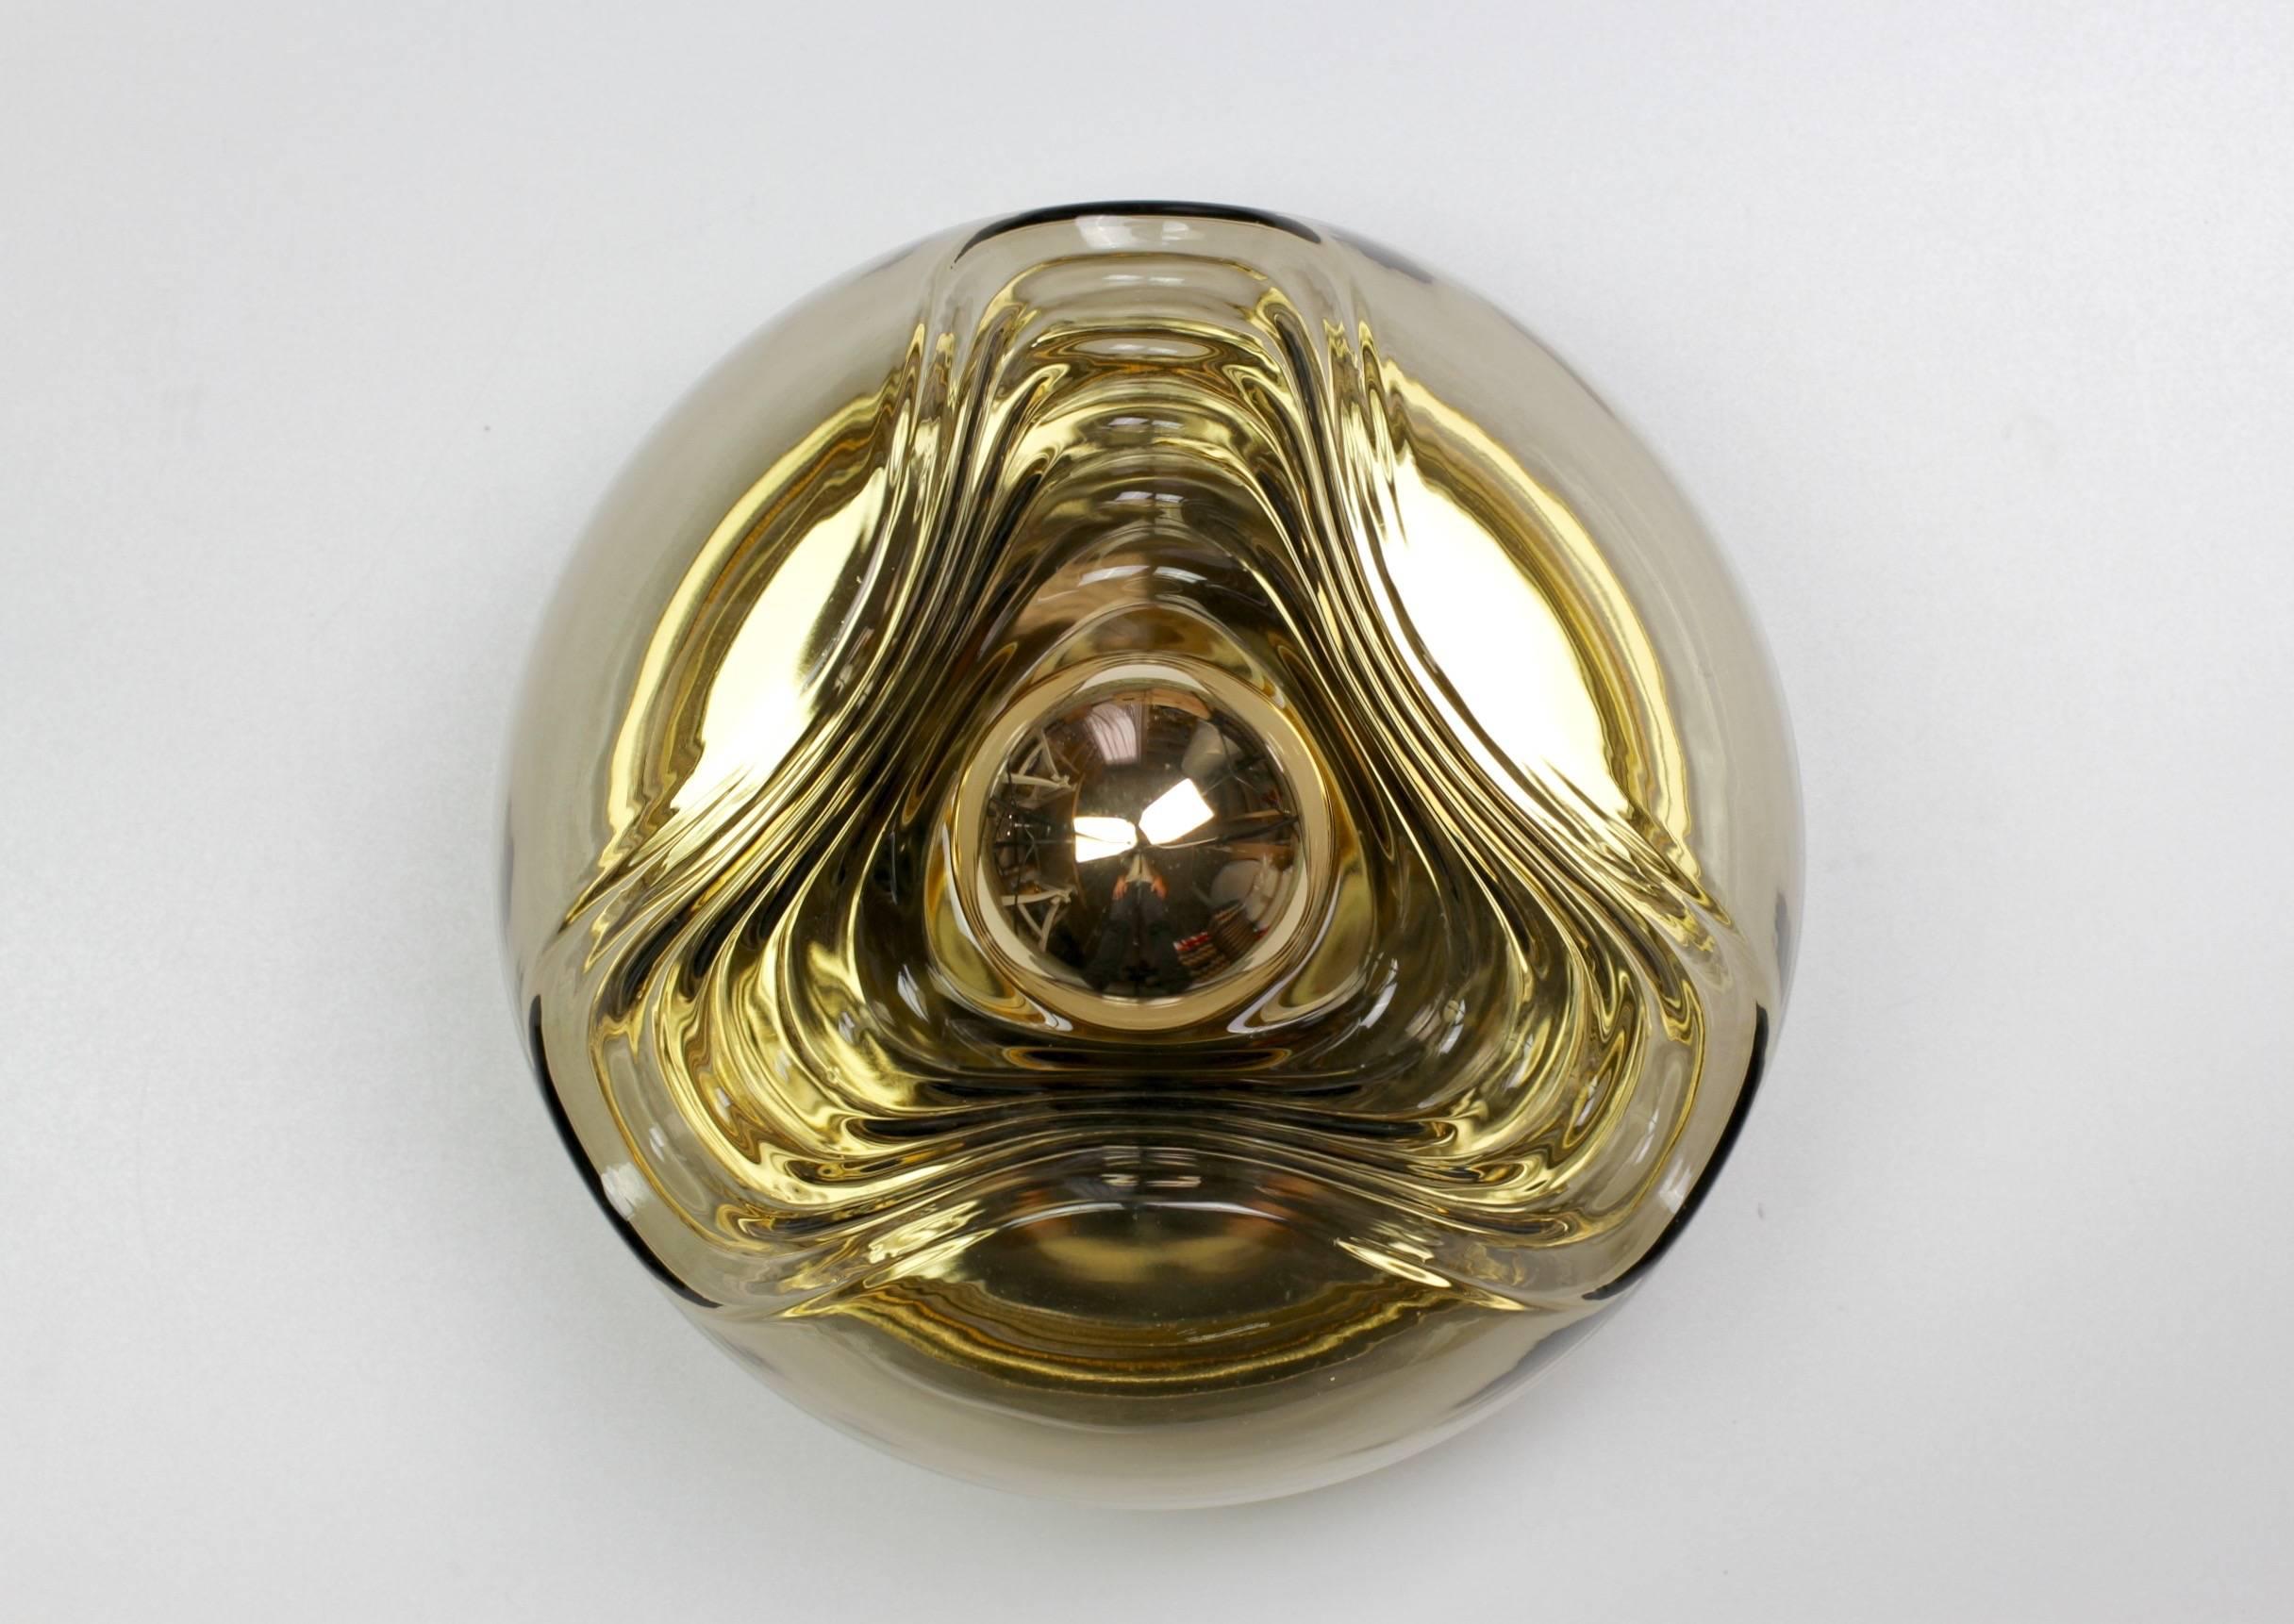 Vintage Mid-Century flush mount wall light or sconce by Peill & Putzler in the 1970s. This is an absolutely Classic piece of design, featuring a smoked colored (colored) glass globe shade with a waved/ribbed molded bubble form, casting a beautiful